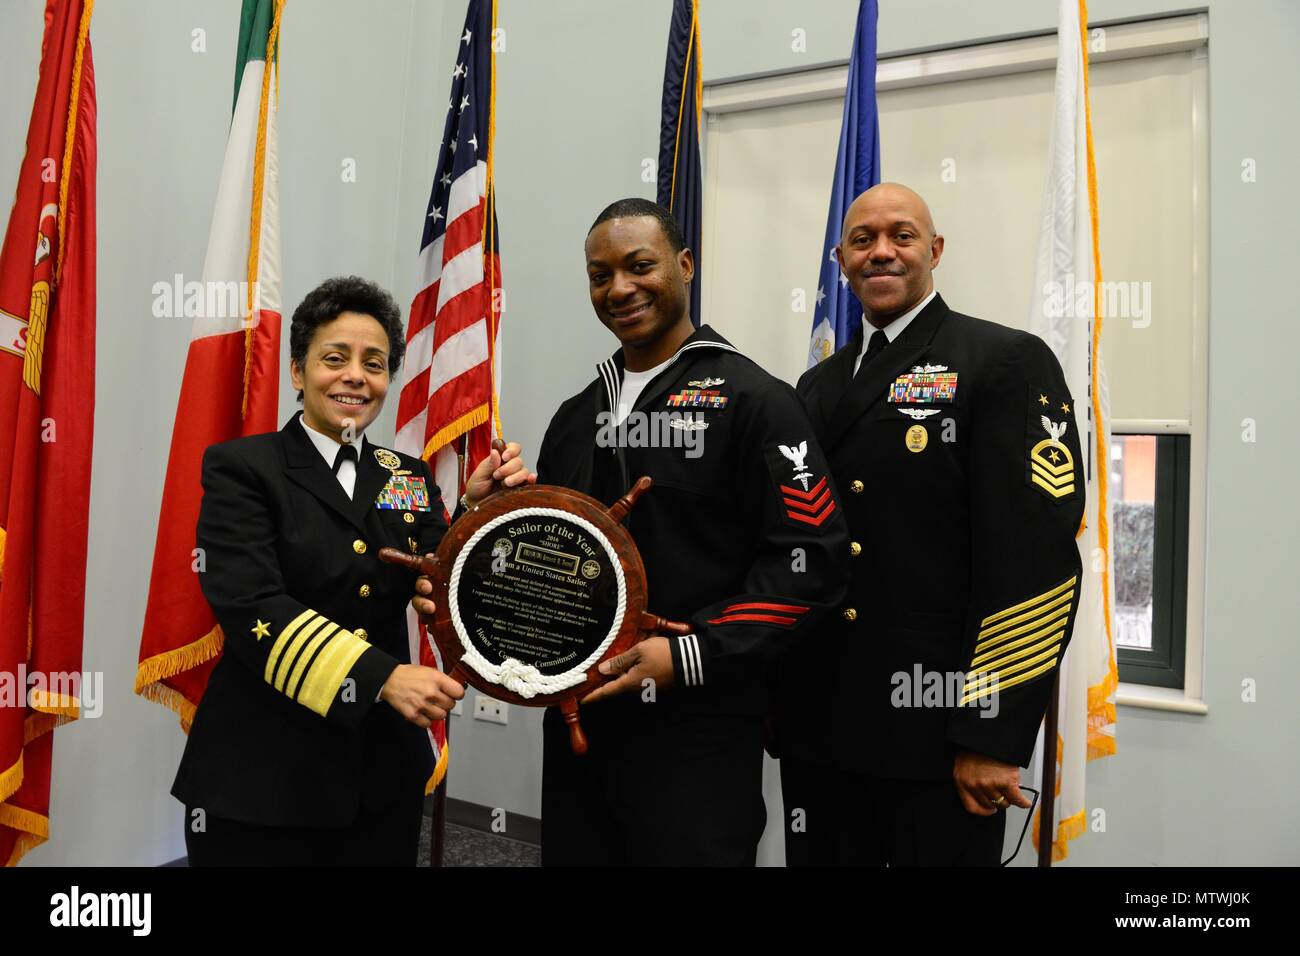 170127-N-SS492-679 NAVAL SUPPORT ACTIVITY NAPLES, Italy (Jan. 27, 2017) From left to right: Commander, U.S. Naval Forces Europe-Africa, Adm. Michelle Howard; U.S. Naval Forces Europe-Africa Shore Sailor of the Year, Hospital Corpsman 1st Class Kenneth Terrell; and U.S. Naval Forces Europe-Africa Fleet Master Chief Raymond D. Kemp Sr. pose for a photo as Howard presents Terrell with a plaque at the Commander, U.S. Naval Forces Europe-Africa Sailor of the Year ceremony Jan. 27, 2017.  U.S. Naval Forces Europe-Africa, headquartered in Naples, Italy, oversees joint and naval operations, often in c Stock Photo